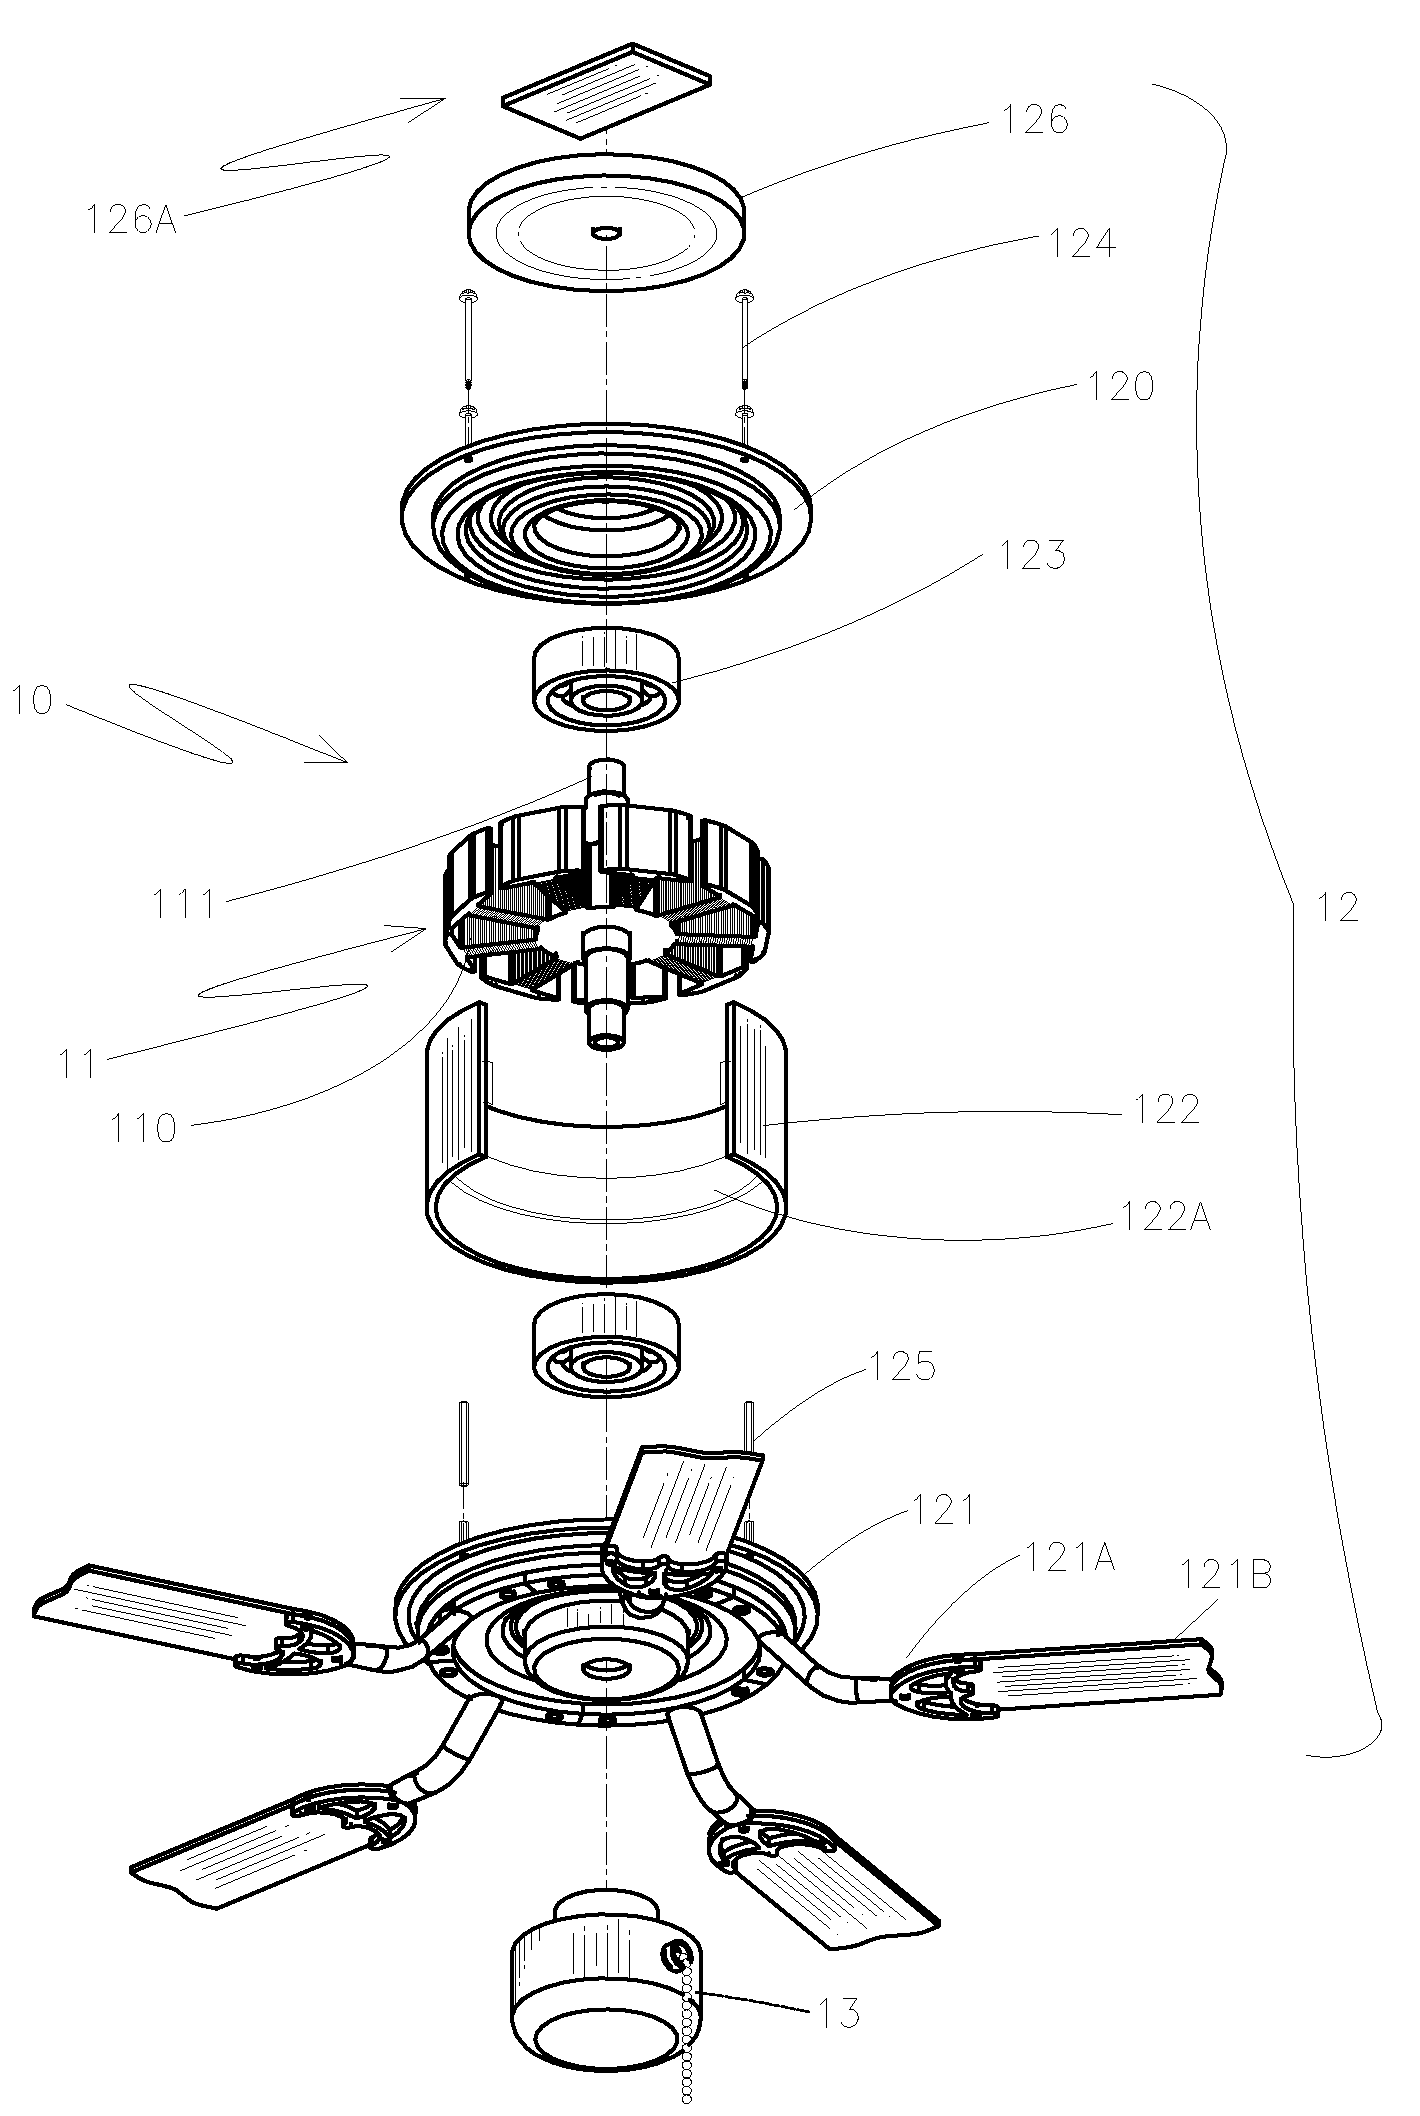 Integrated stator and rotor for a DC brushless ceiling fan motor